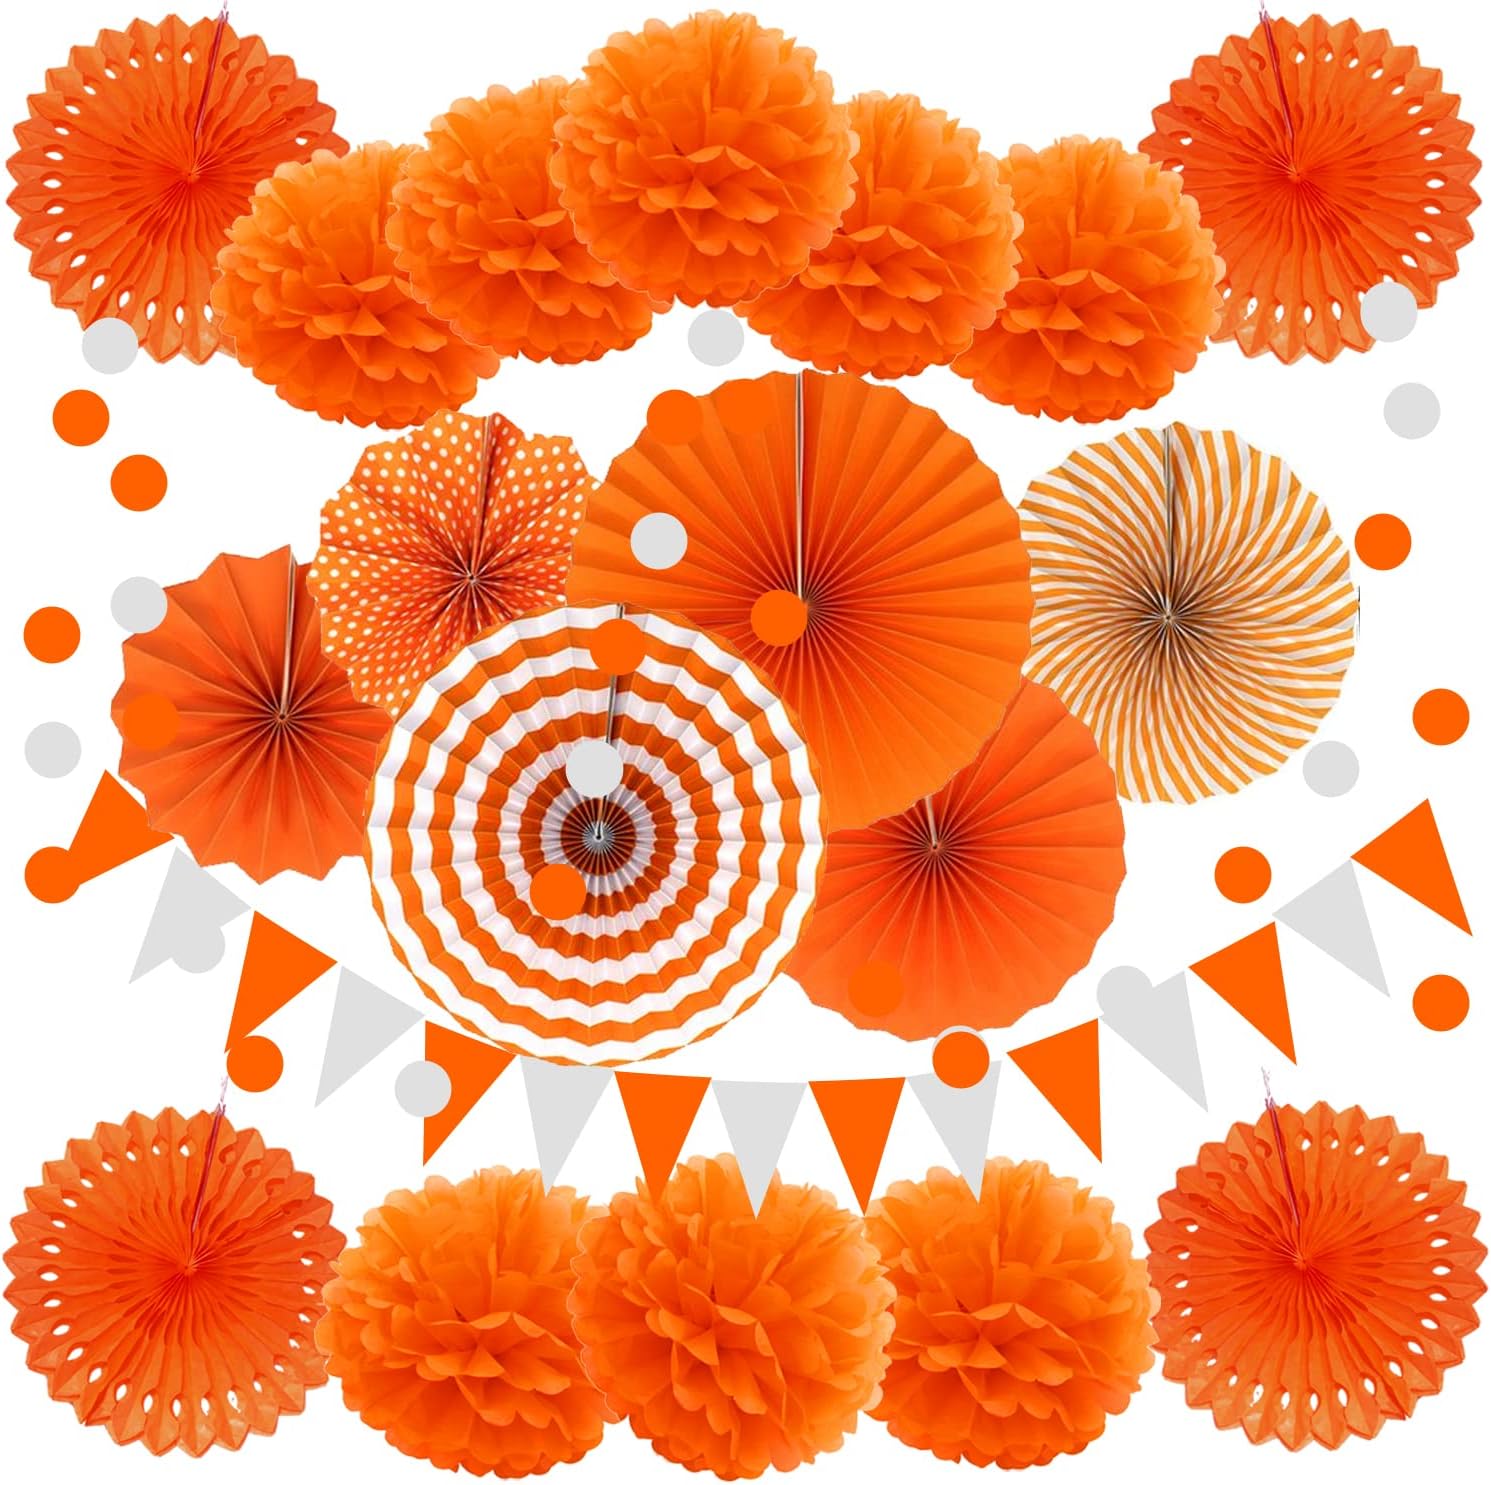 ZERODECO Party Decoration, 21 Pcs Orange Hanging Paper Fans Pom Poms Flowers, Garlands String Polka Dot and Triangle Bunting Flags for Minnie Mouse Birthday Parties Baby Showers Wedding